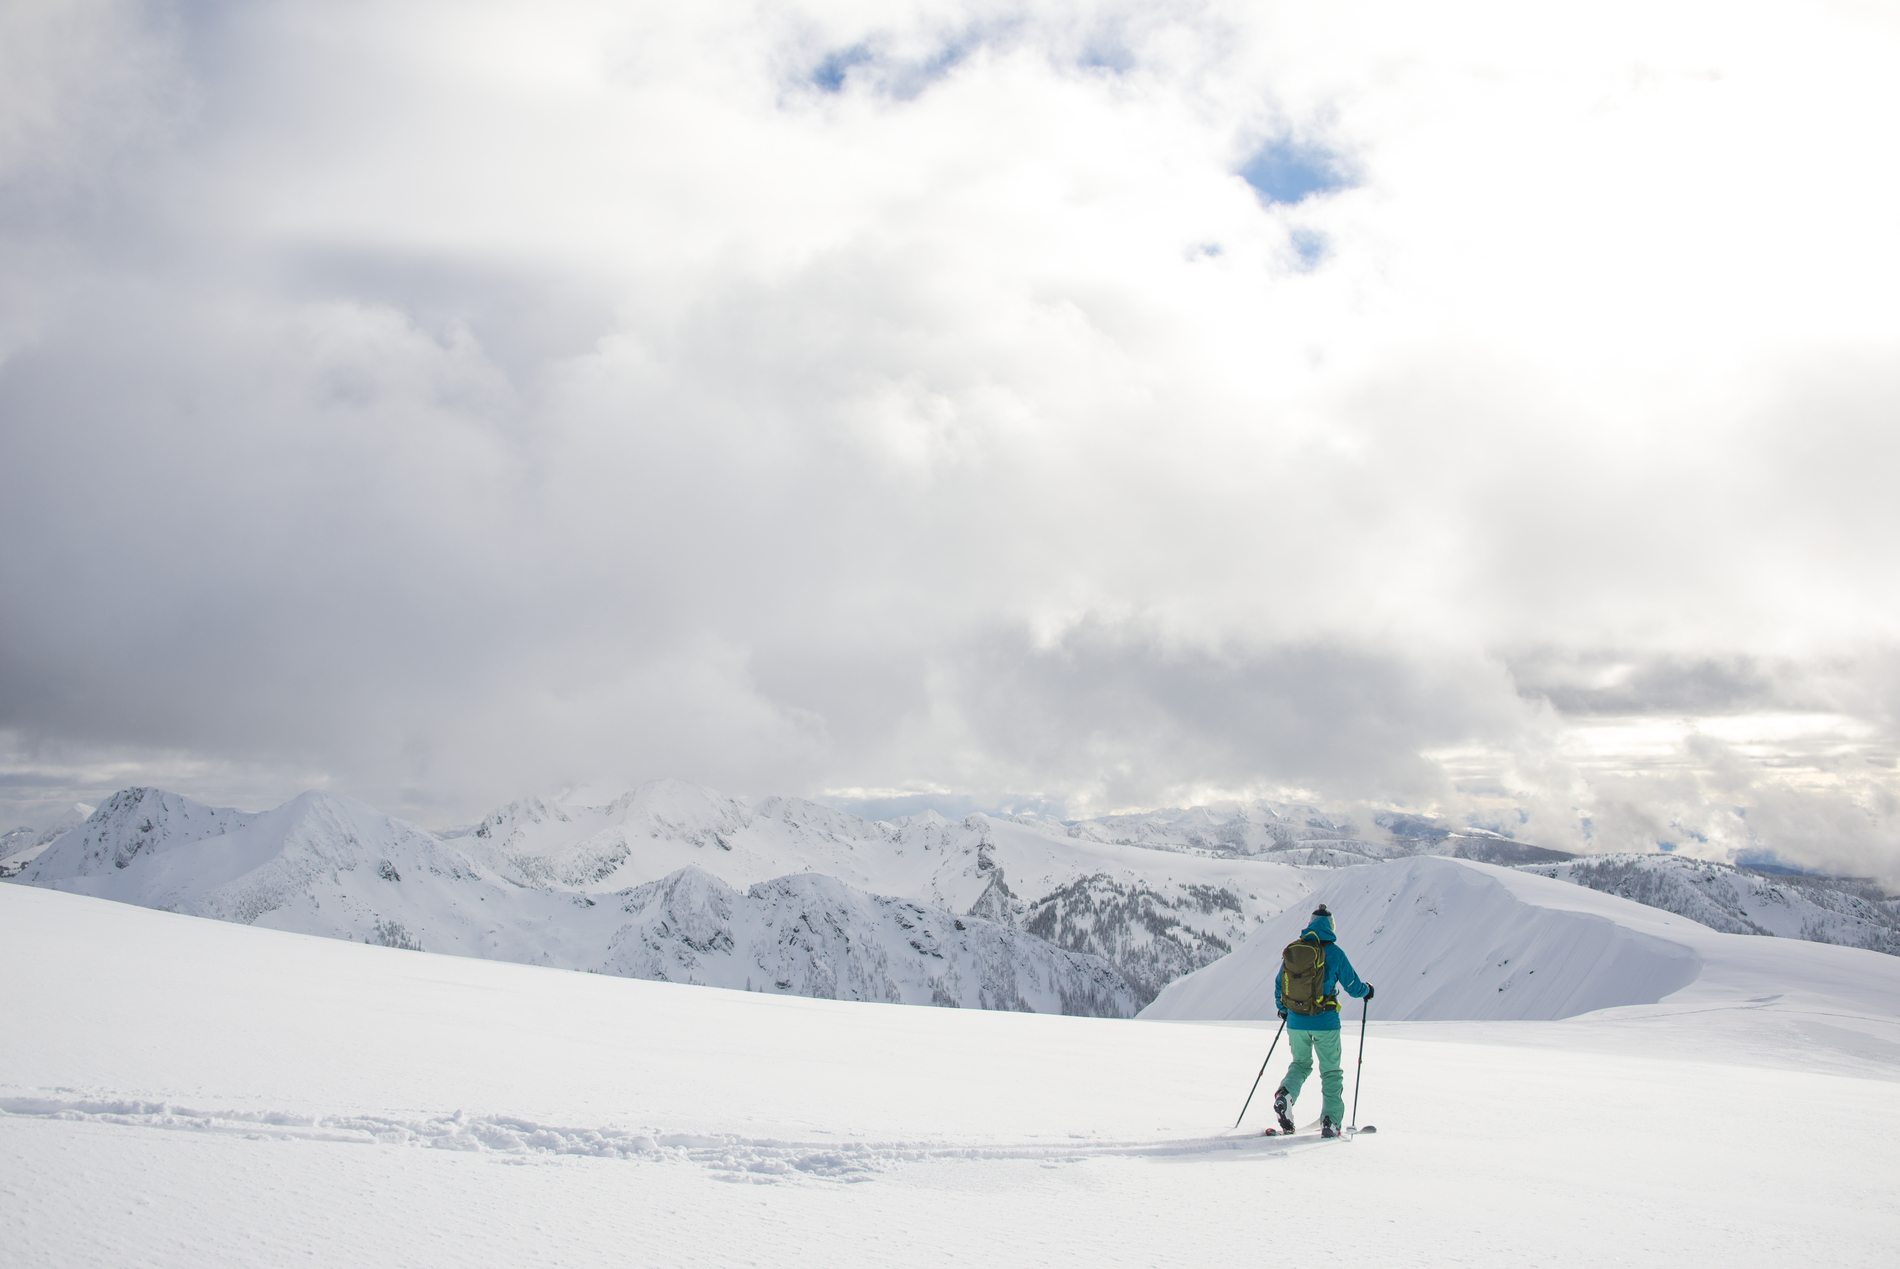 Backcountry skiing in the Valkyr Range of the southern Selkirk Mountains. The skier is wearing green snow pants and a blue jacket moving away from the camera. Clouds obscure the sky.